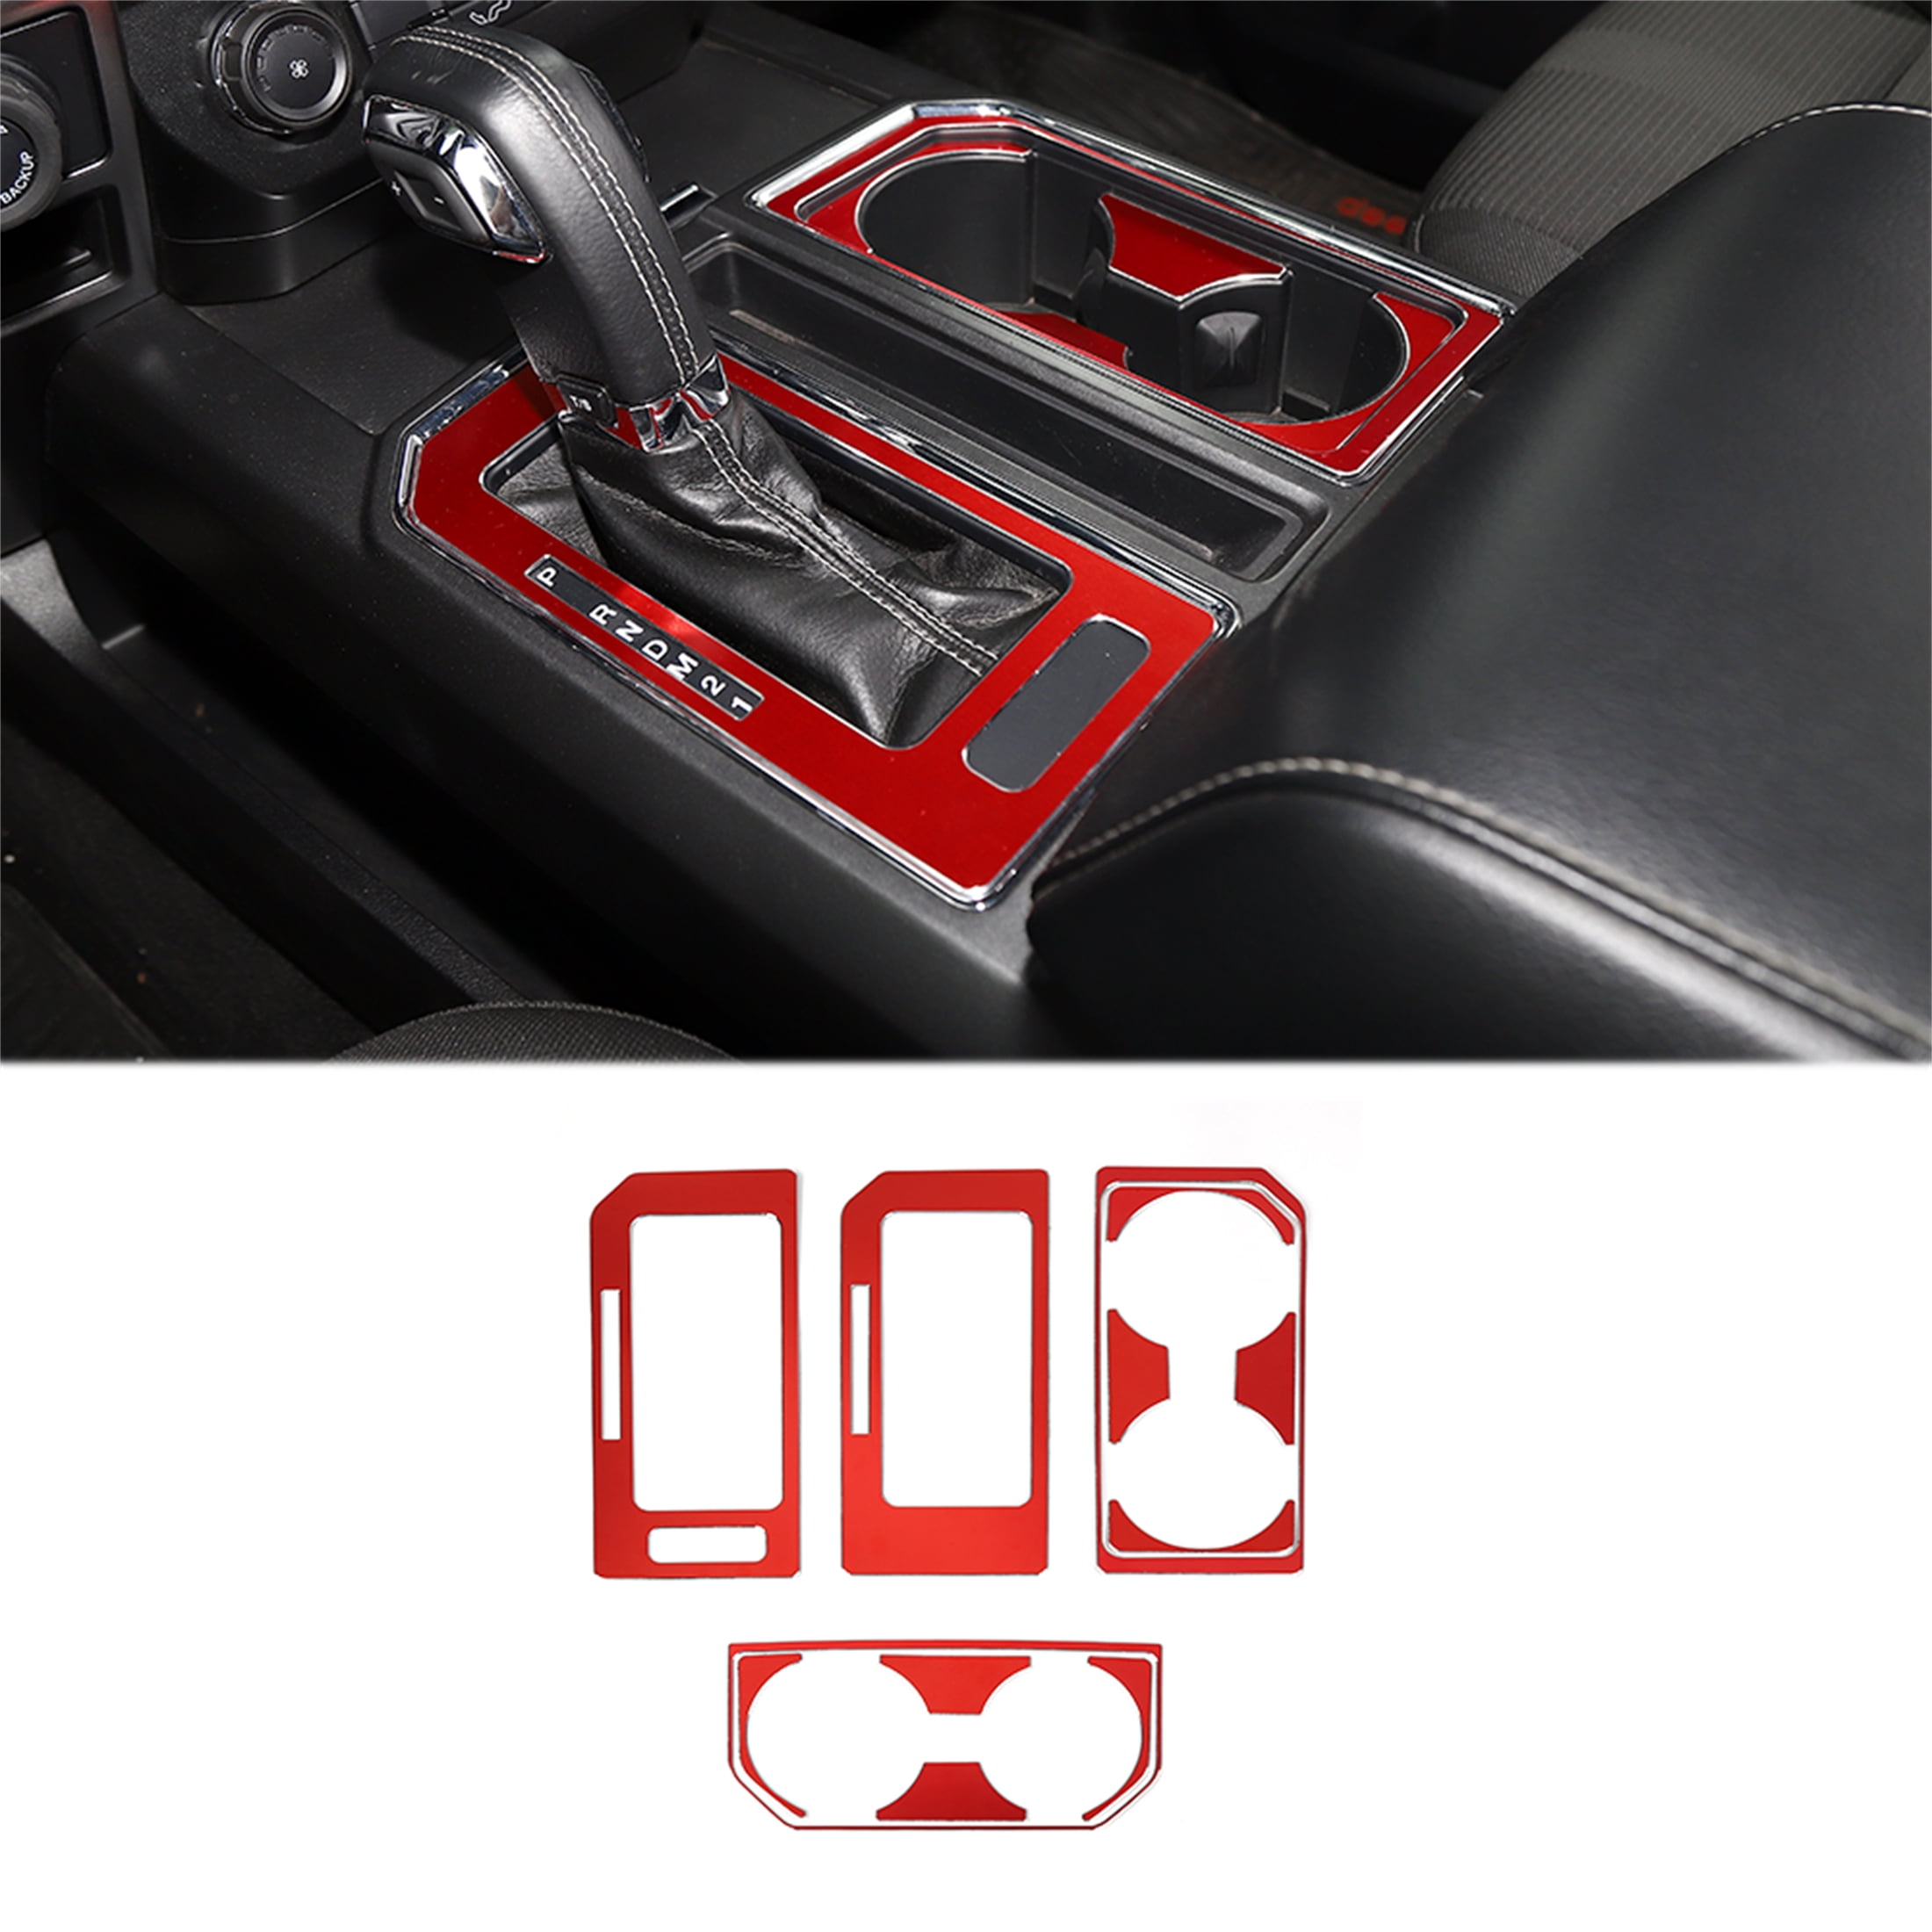 8.8 Inch Red Center Console Dashboard Navigation Display Cover